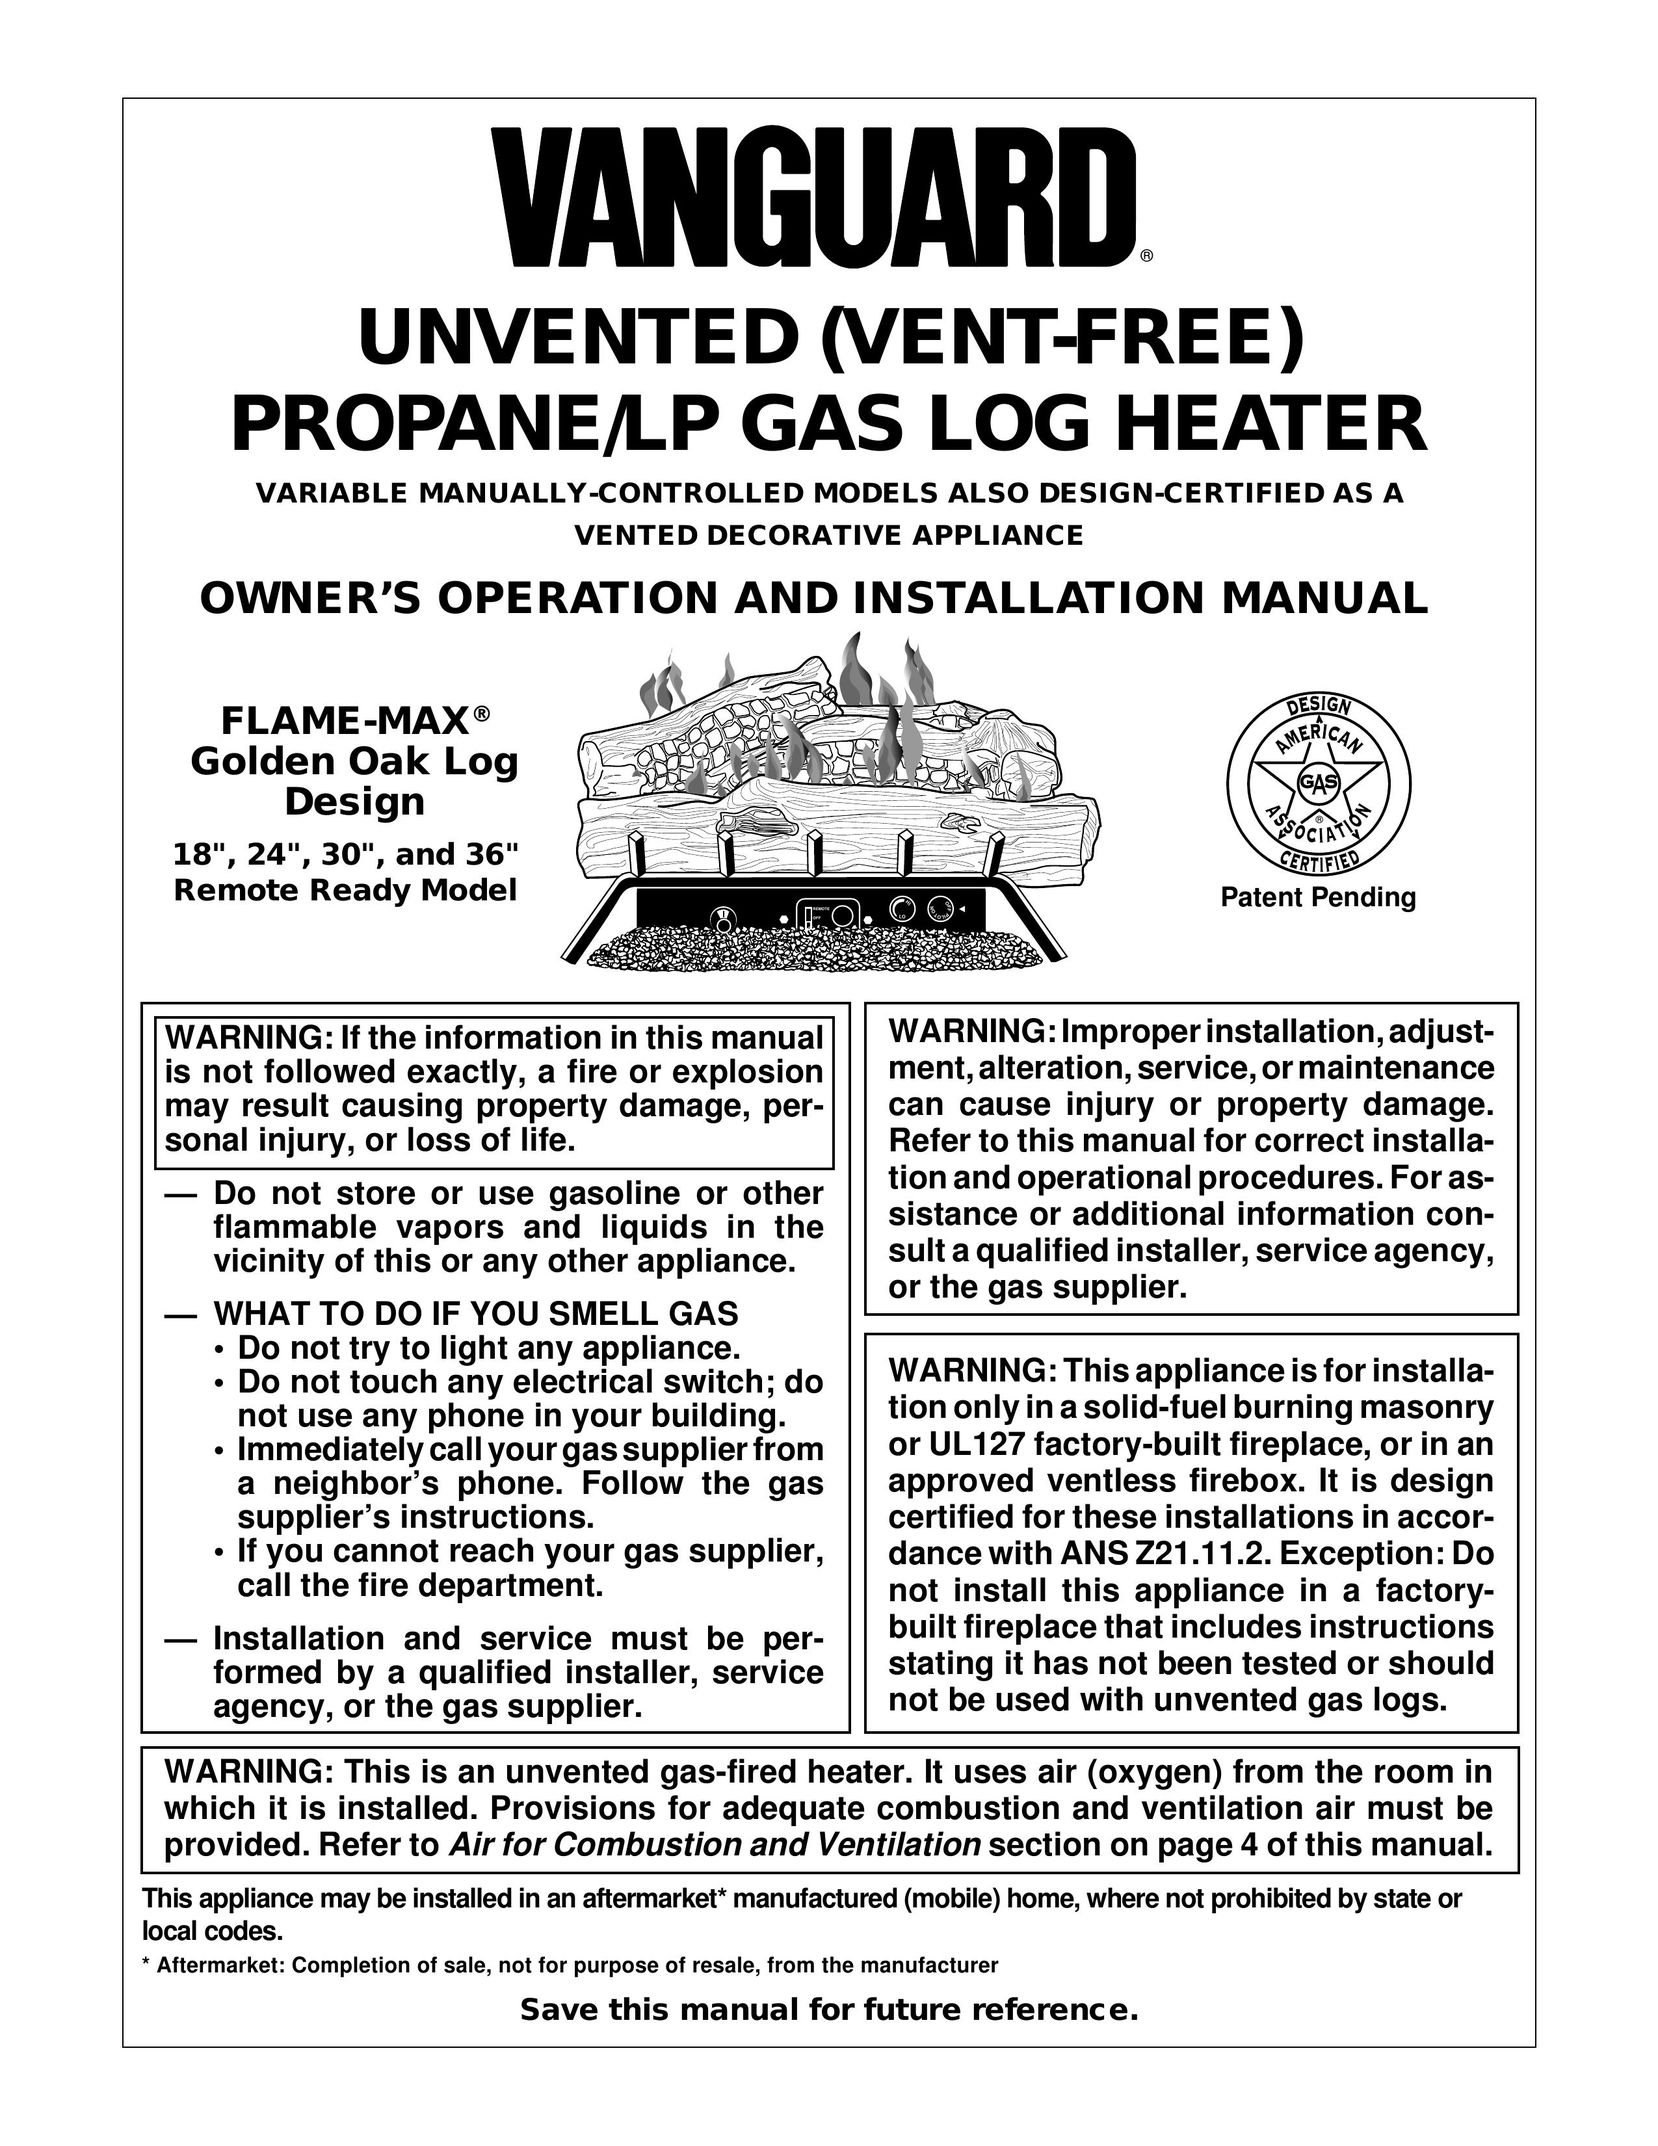 Vanguard Heating UNVENTED (VENT-FREE) PROPANE/LP GAS LOG HEATER Electric Heater User Manual